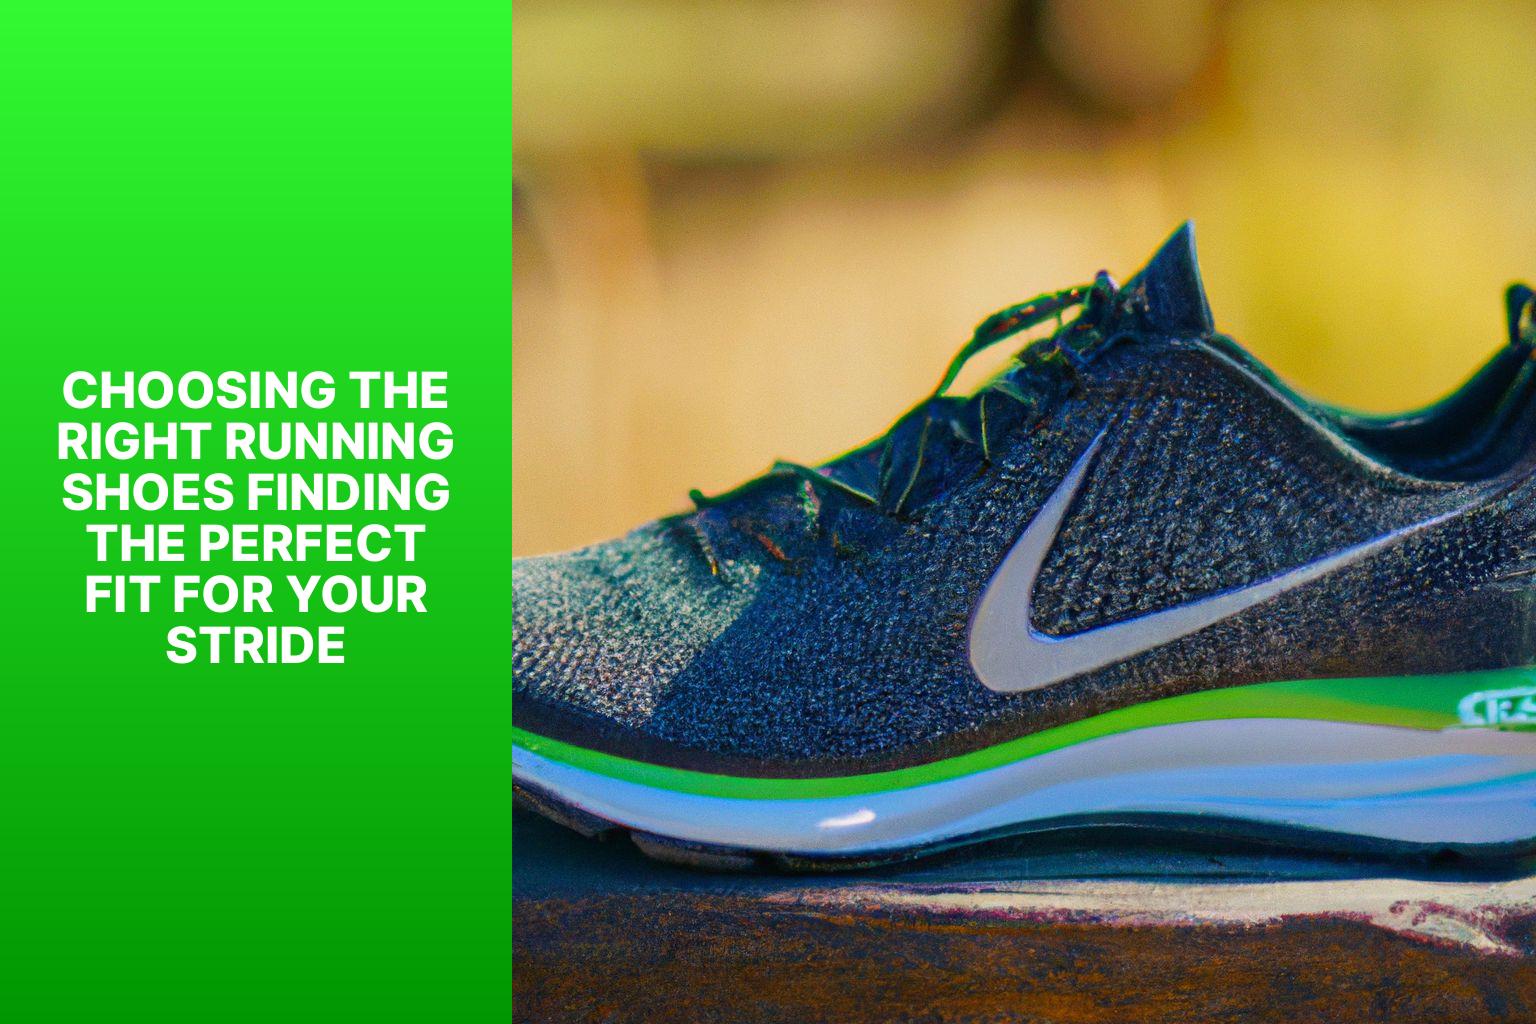 Choosing the Right Running Shoes Finding the Perfect Fit for Your Stride